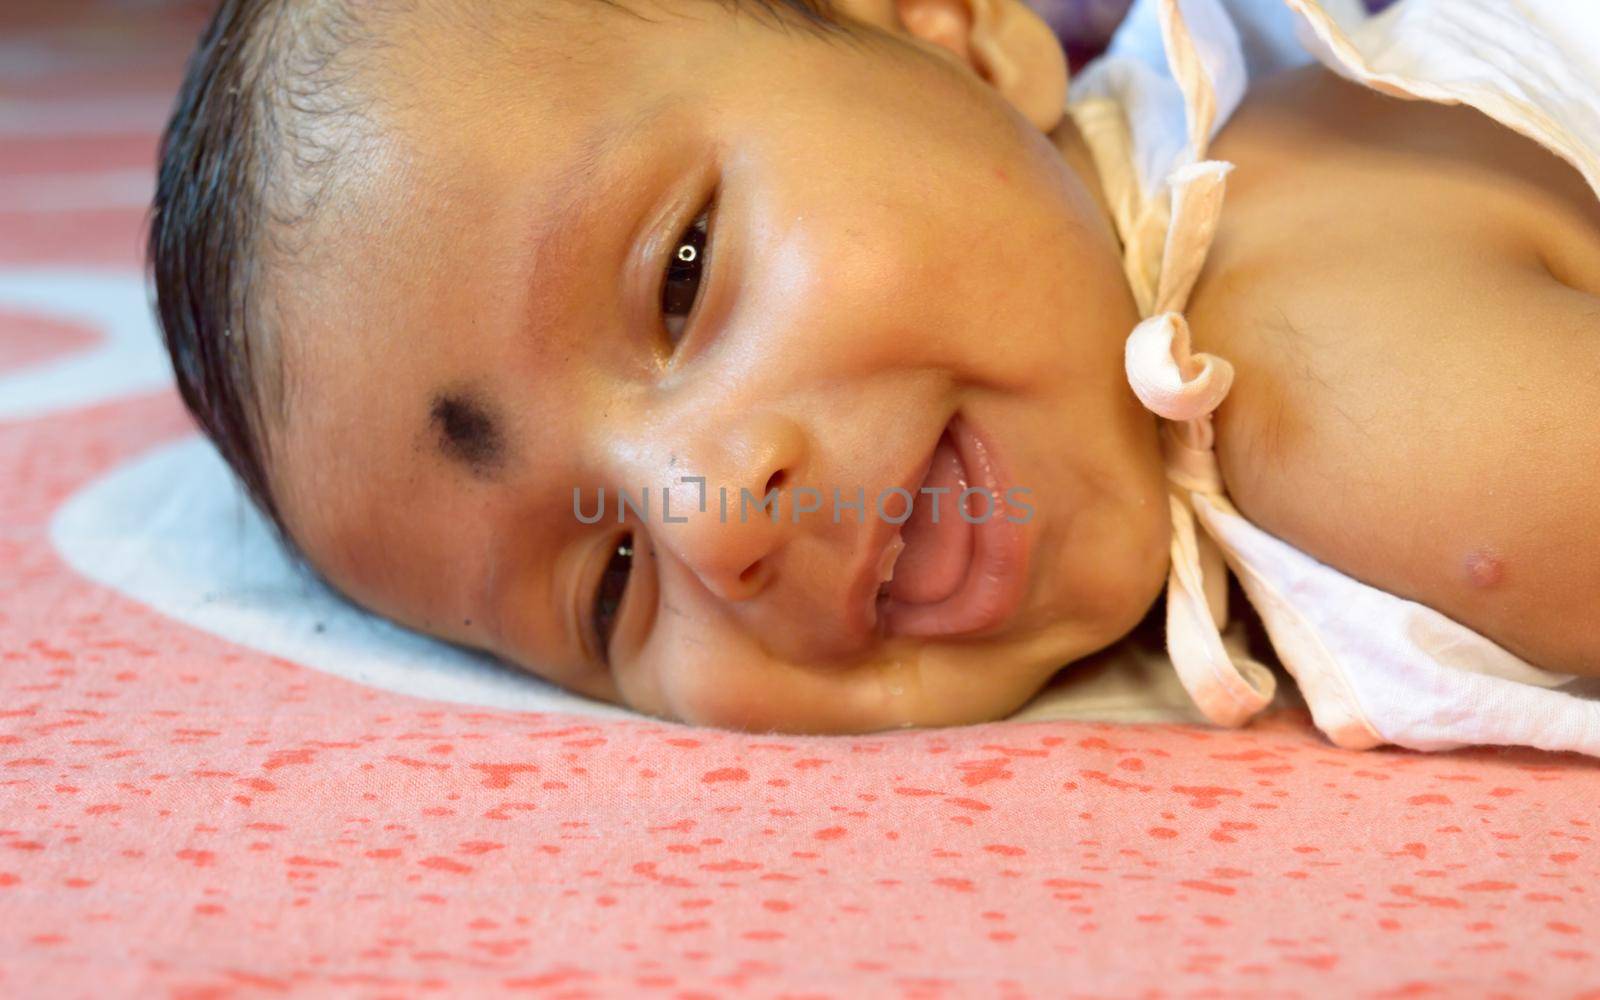 Close up face of cute newborn baby boy in smiling happy mood. One month old Sweet little infant toddler Closeup portrait. Indian ethnicity. Front view. Child care peace tranquil background.